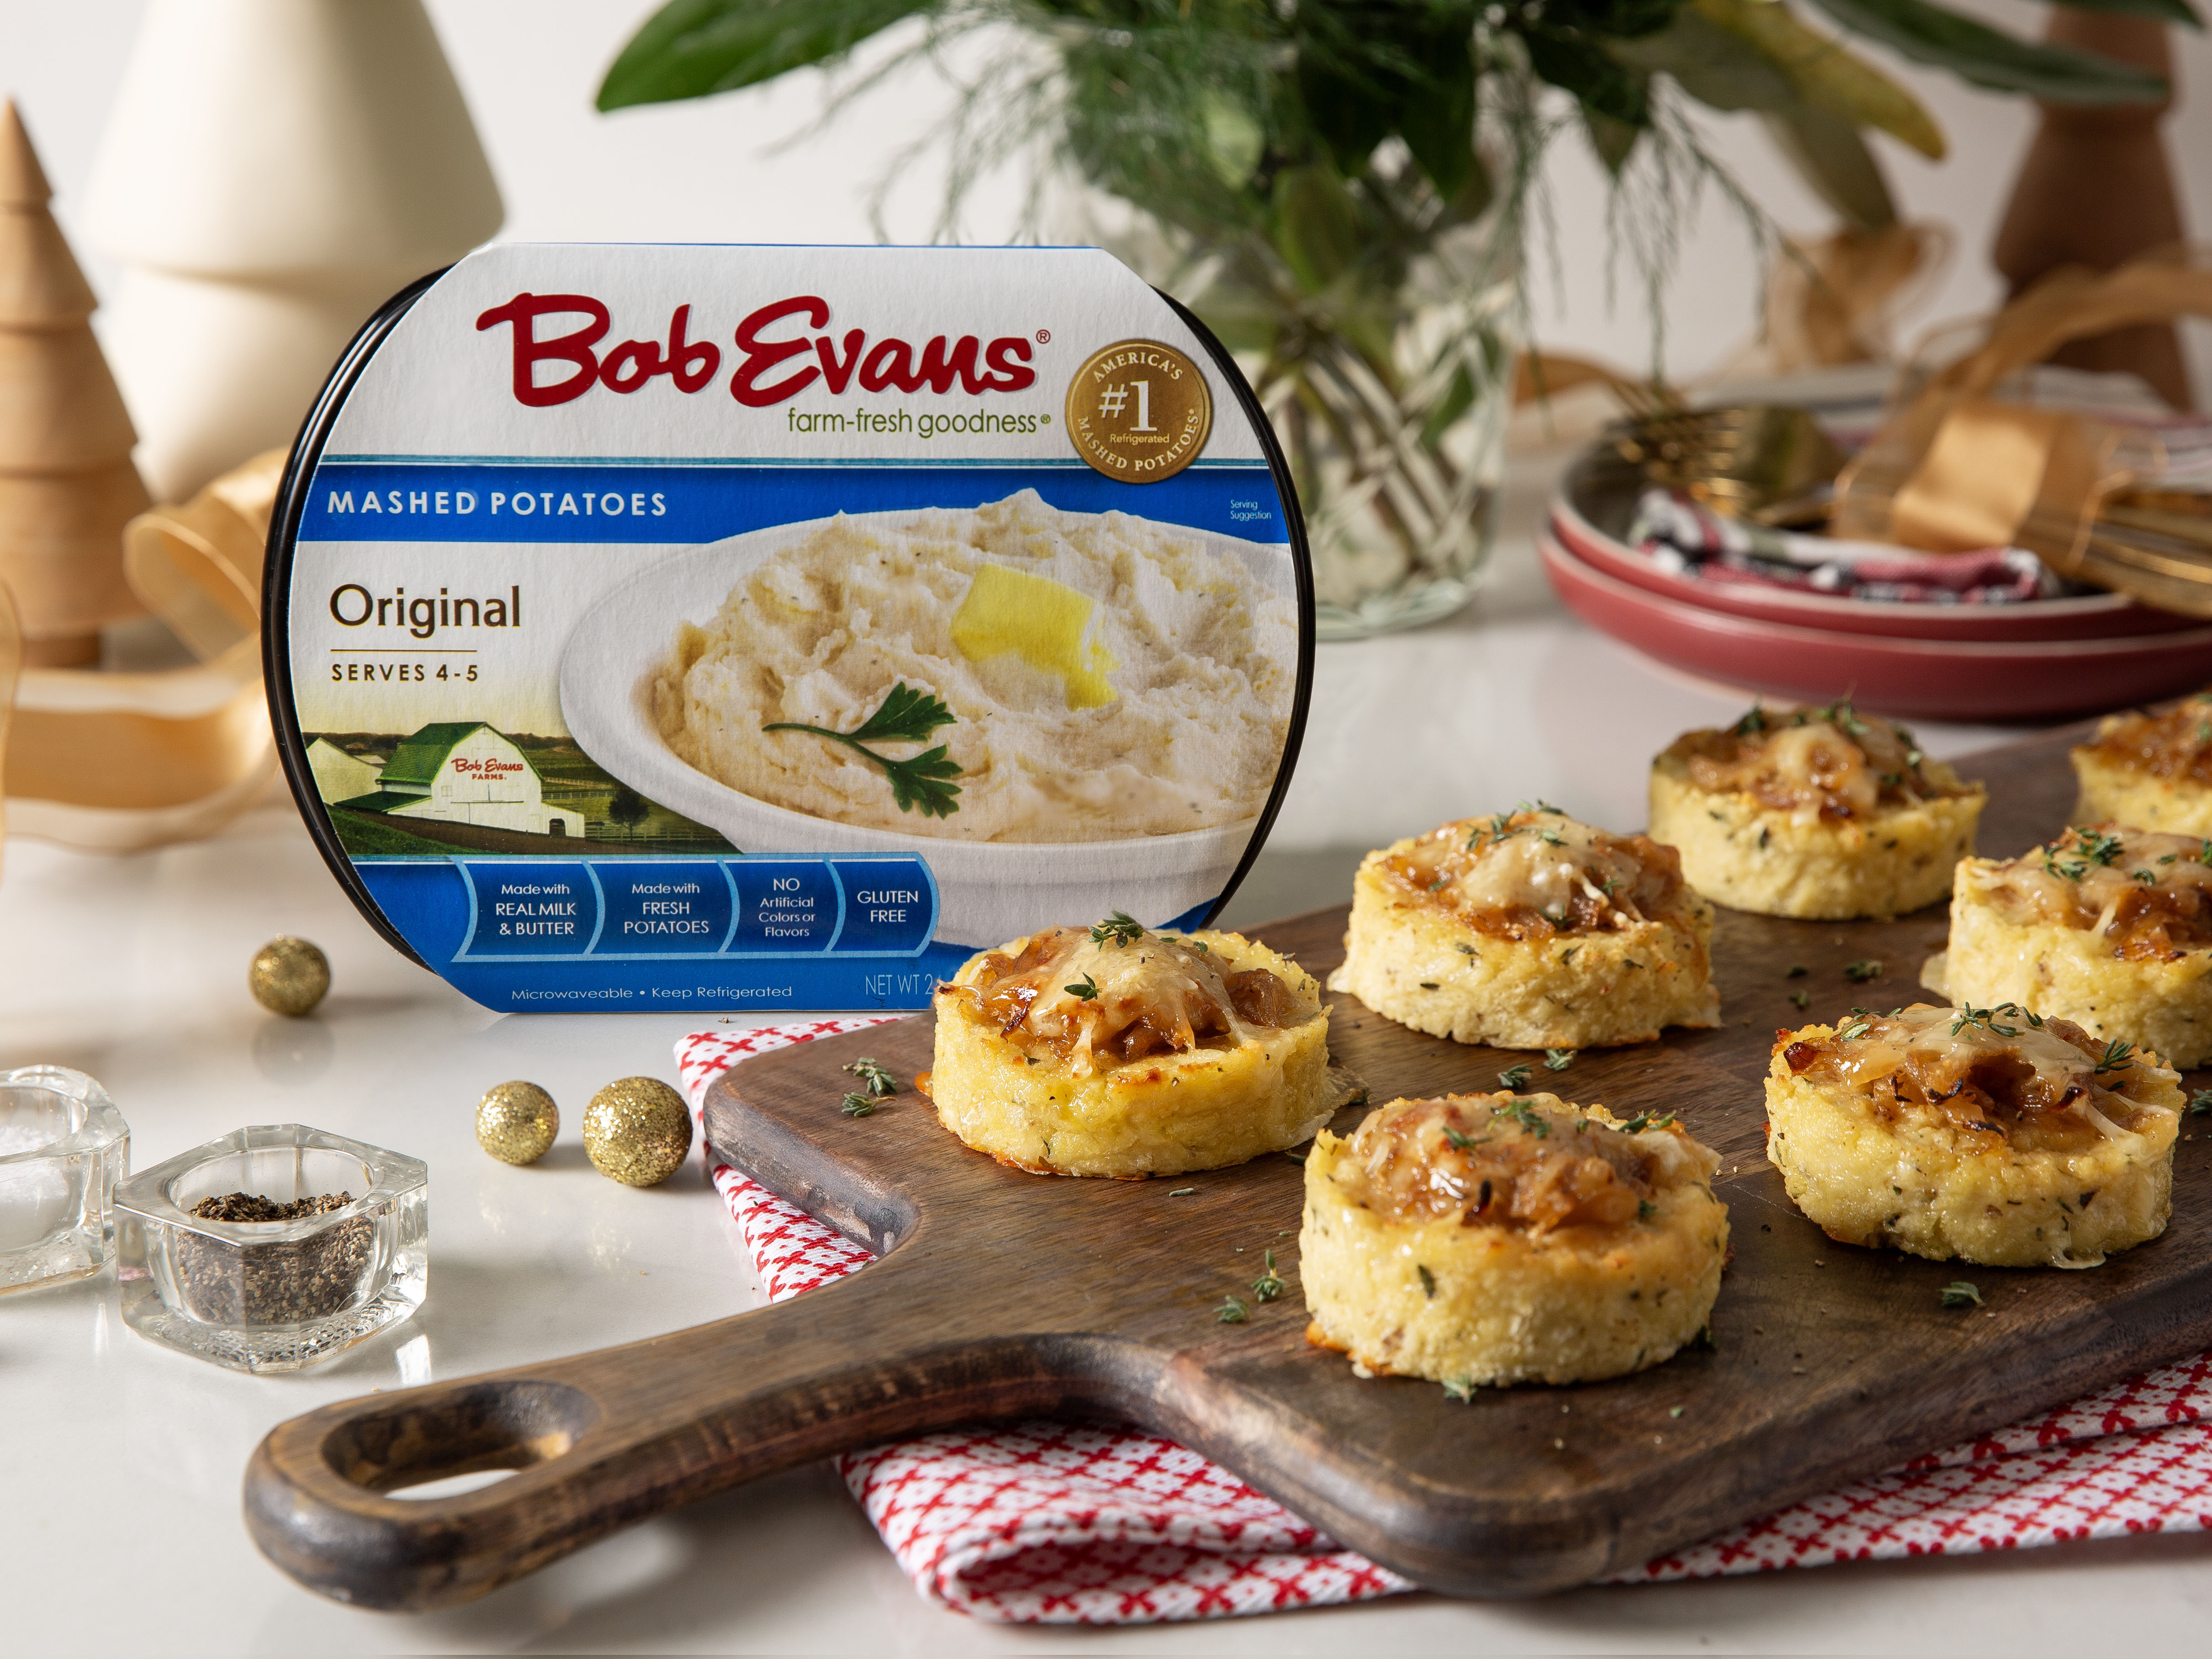 French onion mashed potato cakes on a wooden serving board next to Bob Evans Original Mashed Potatoes